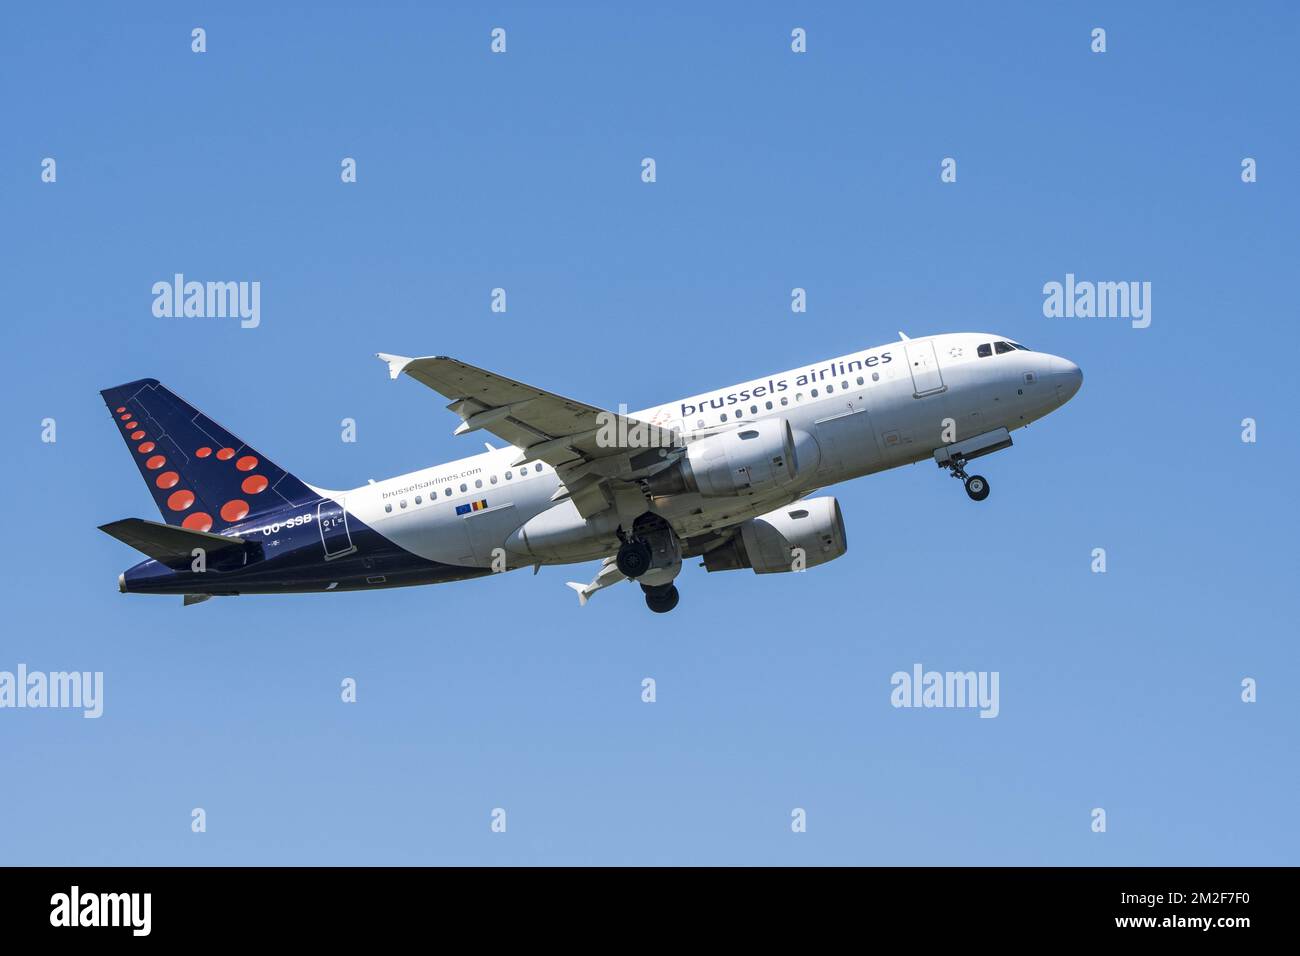 Airbus A319-111, narrow-body, commercial passenger twin-engine jet airliner from Belgian Brussels Airlines in flight against blue sky | Airbus A319-111, avion de ligne moyen-courrier de Brussels Airlines en vol 06/05/2018 Stock Photo